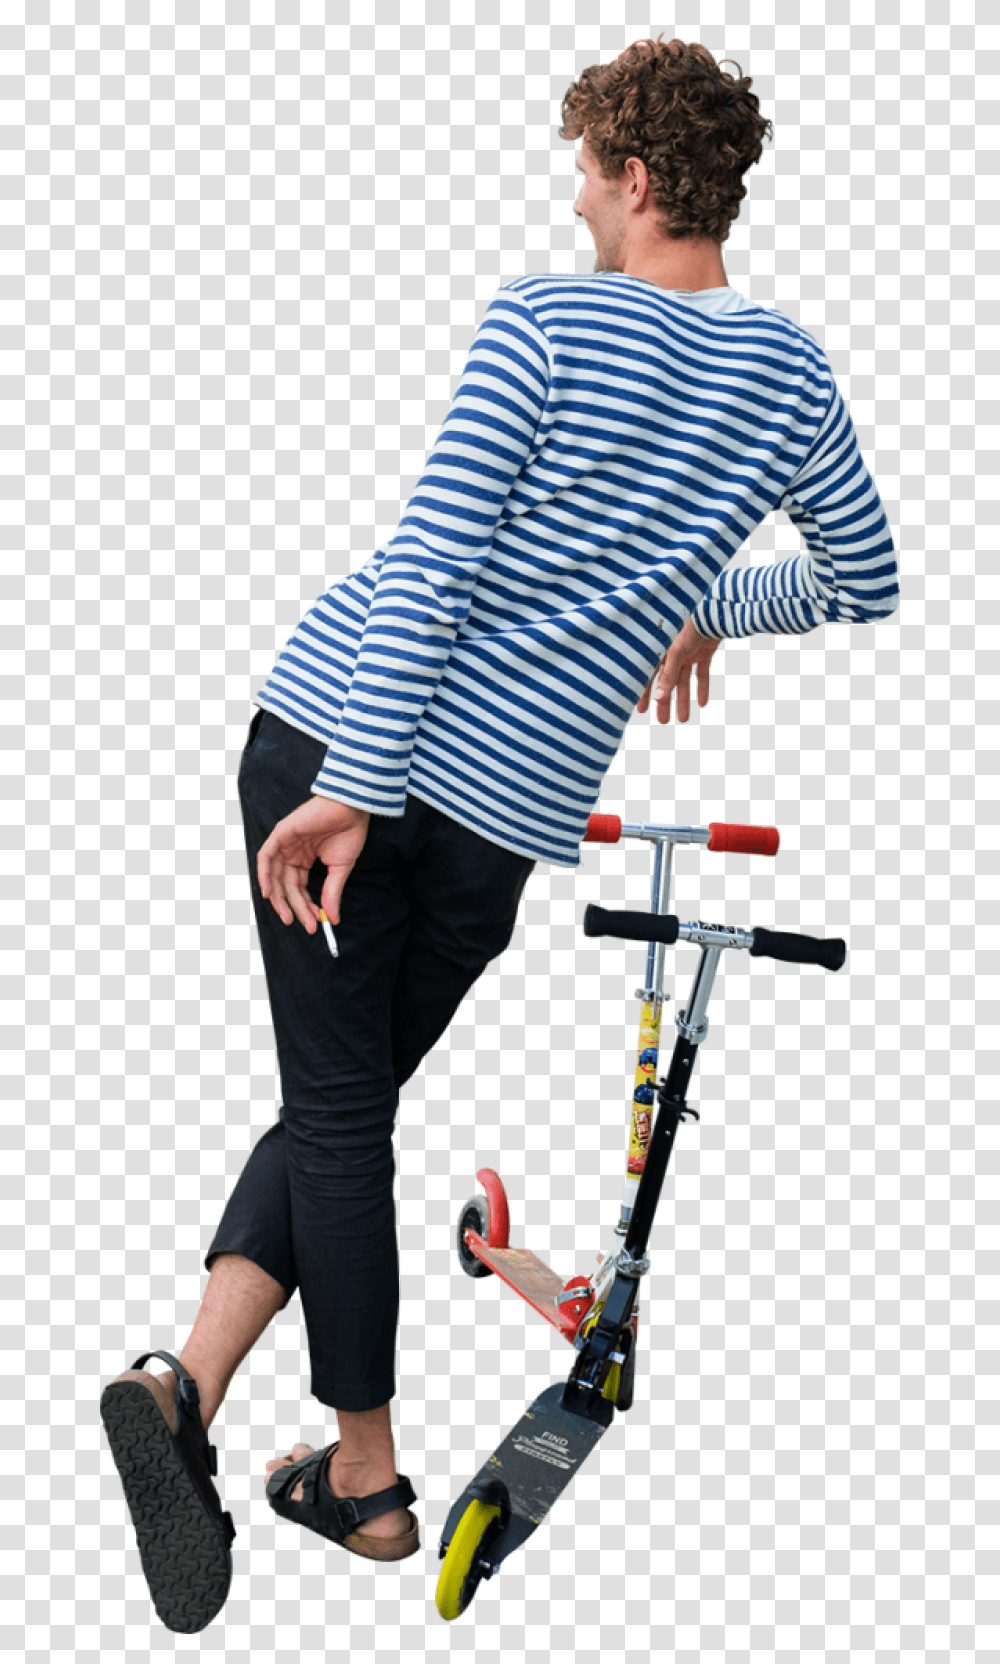 Leaning And Smoking Image People Leaning, Person, Human, Vehicle, Transportation Transparent Png